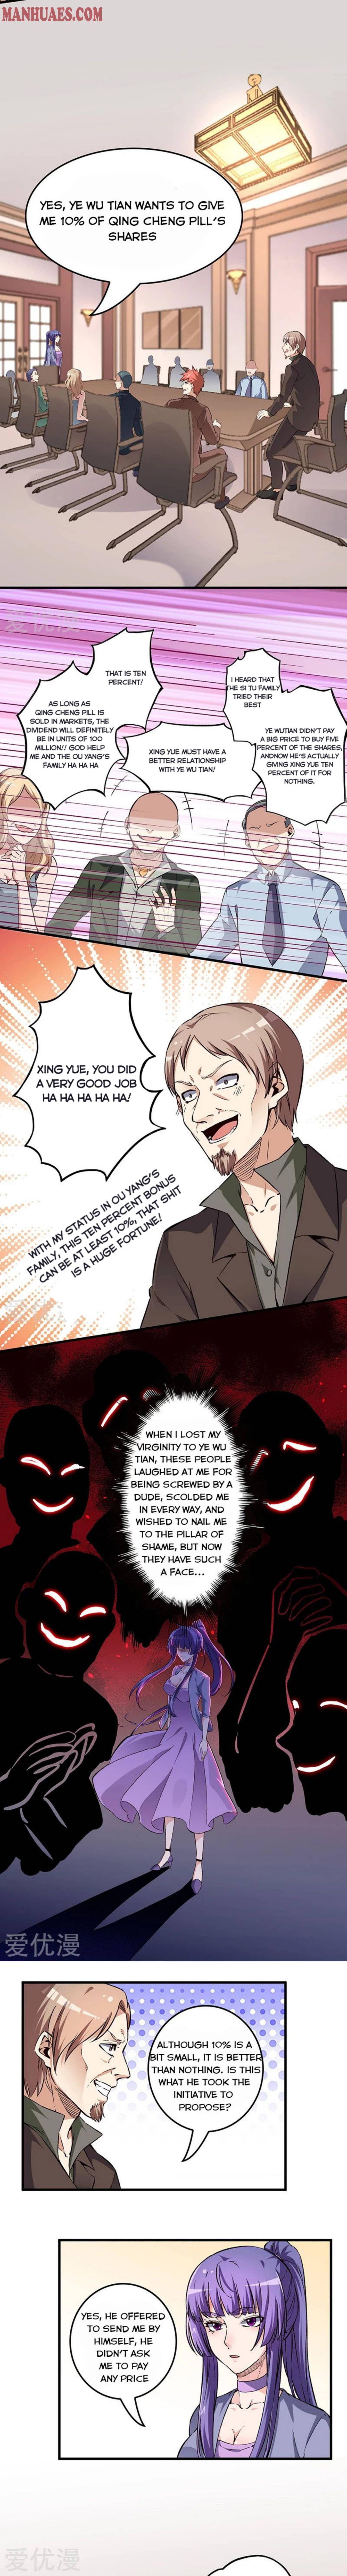 The Super Doctor From 2089 - chapter 185 - #2